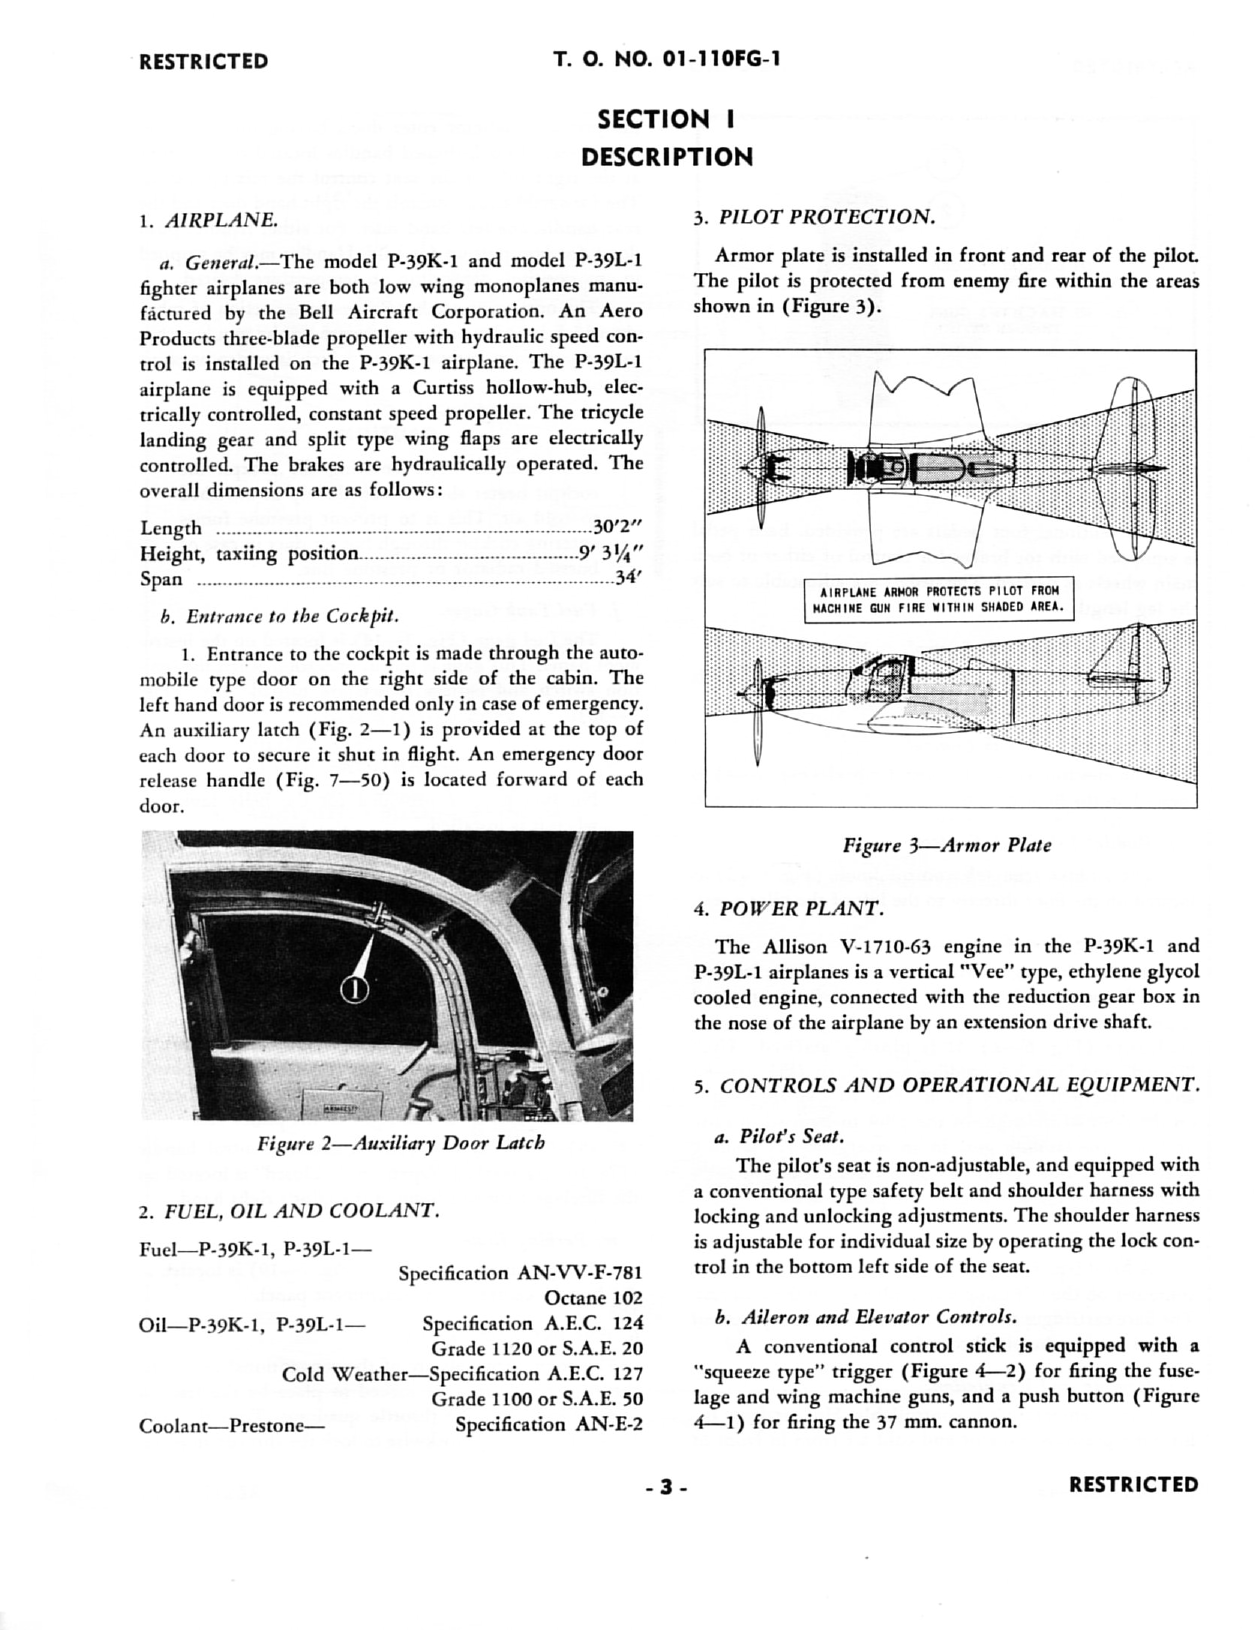 Sample page 5 from AirCorps Library document: Pilot's Flight Operating Instructions for P-39K-1 and P-39L-1 